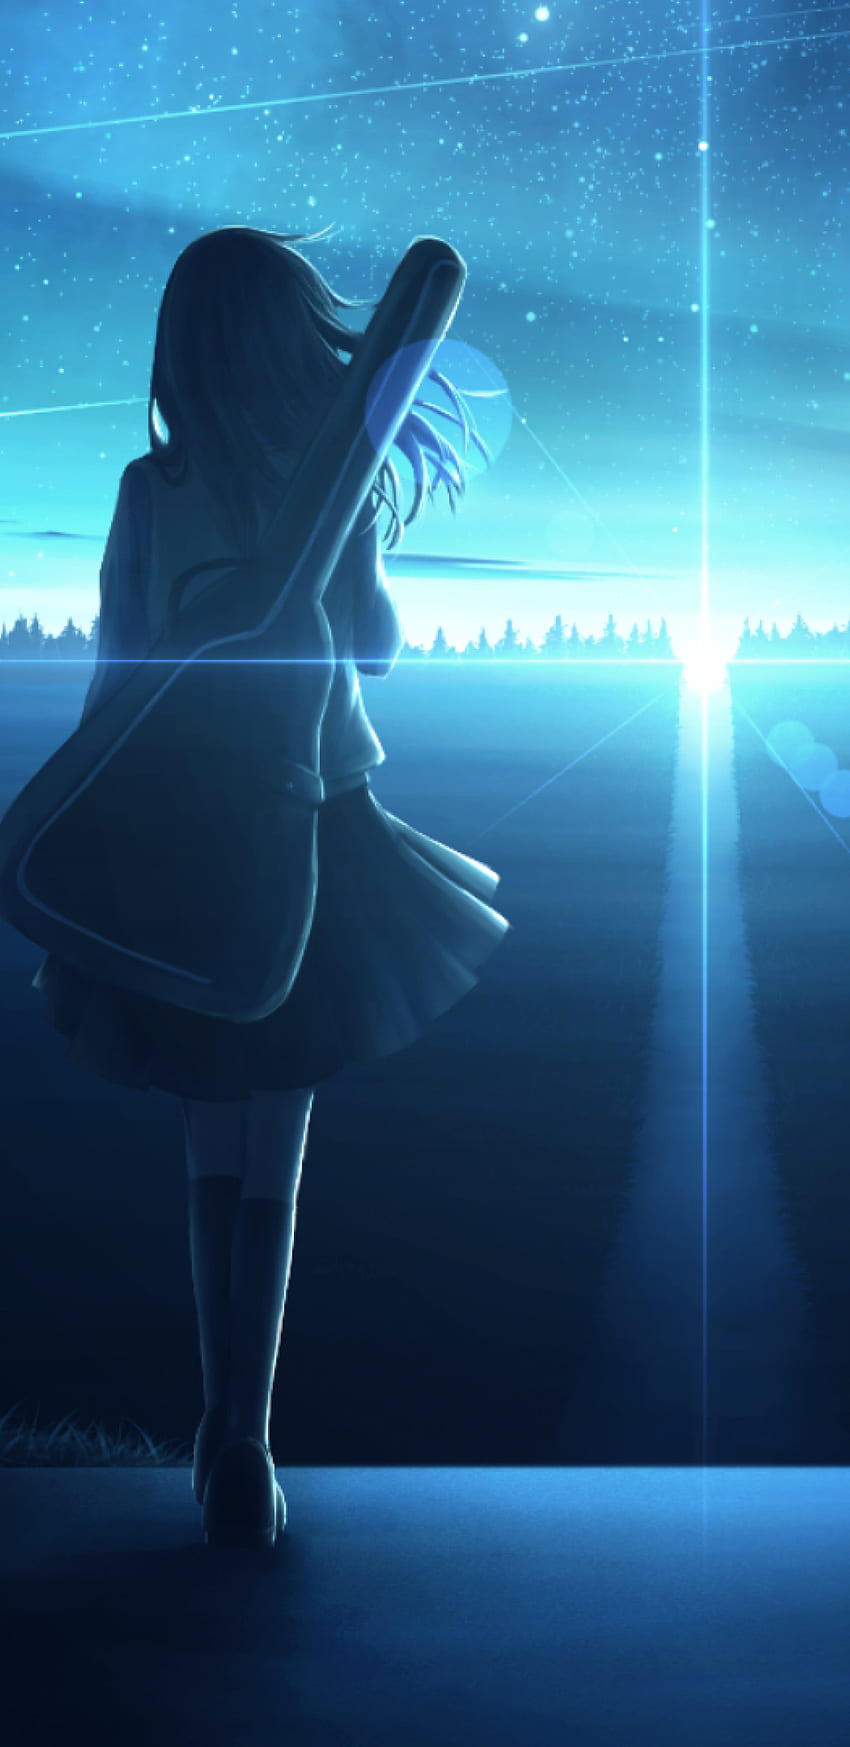 Alone Anime Girl Wallpapers  Top 30 Best Alone Anime Girl Wallpapers  Download